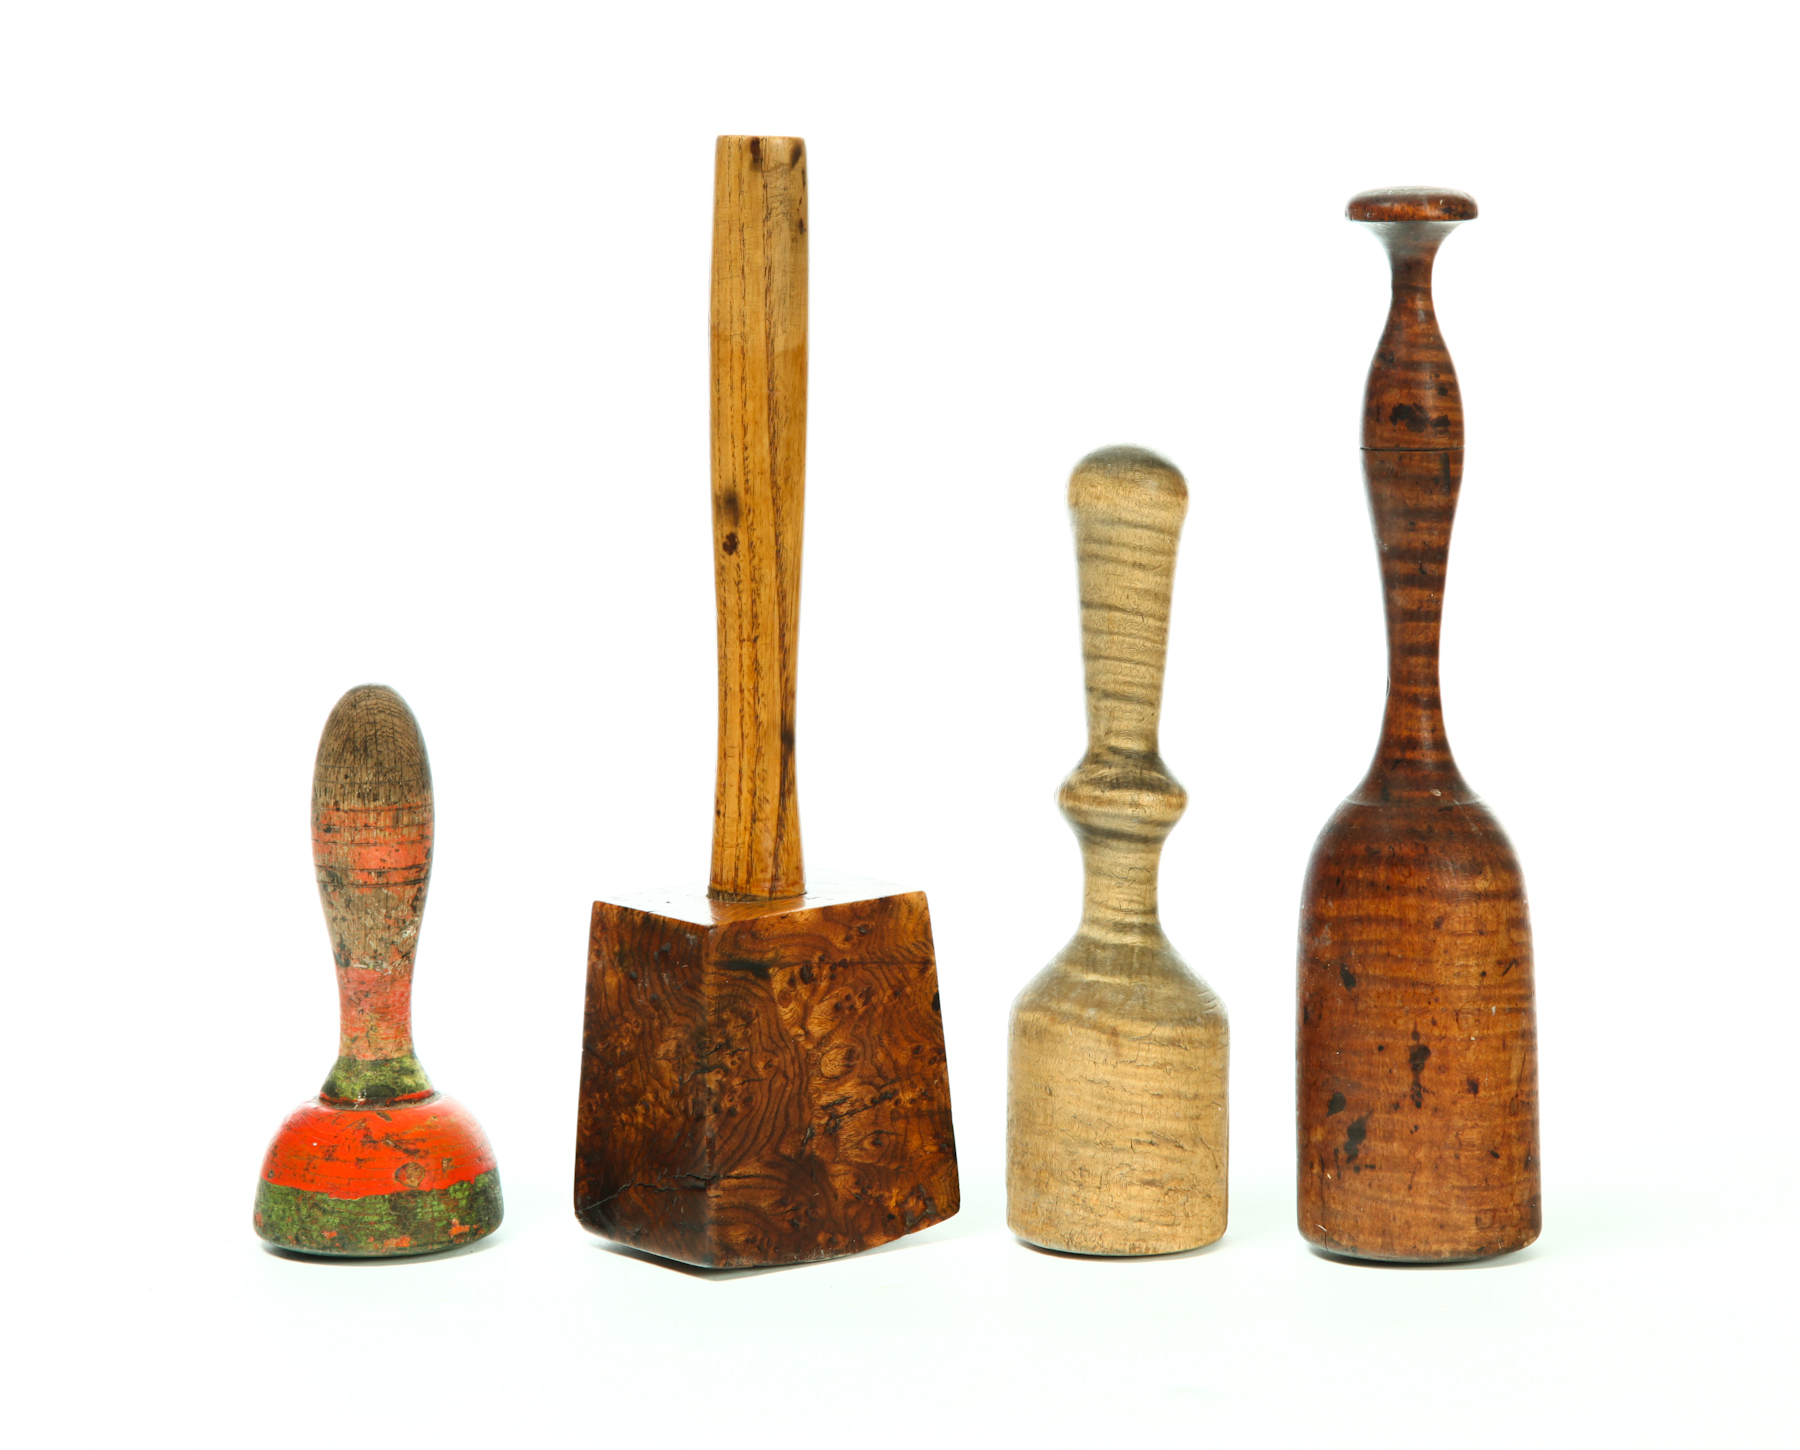 FOUR WOODEN MALLETS AND PESTLES.